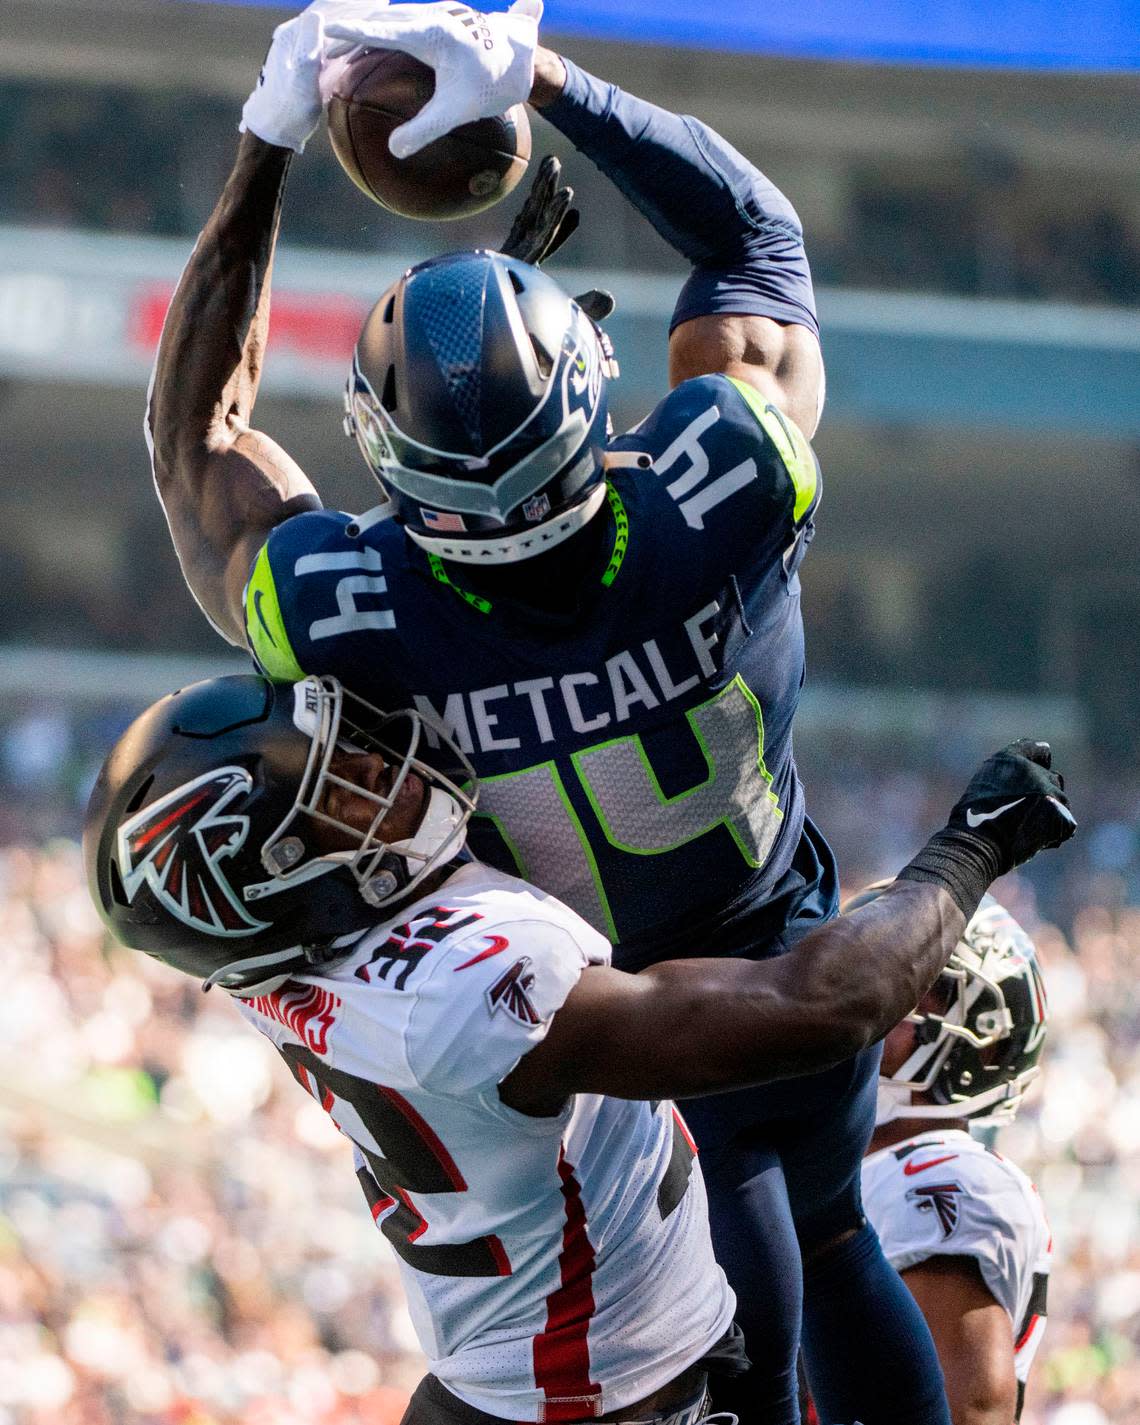 Seattle Seahawks wide receiver DK Metcalf (14) catches a pass from quarterback Geno Smith (7) in the endzone as Atlanta Falcons safety Jaylinn Hawkins (32) defends during the second quarter of an NFL game on Sunday, Sept. 25, 2022, at Lumen Field in Seattle.